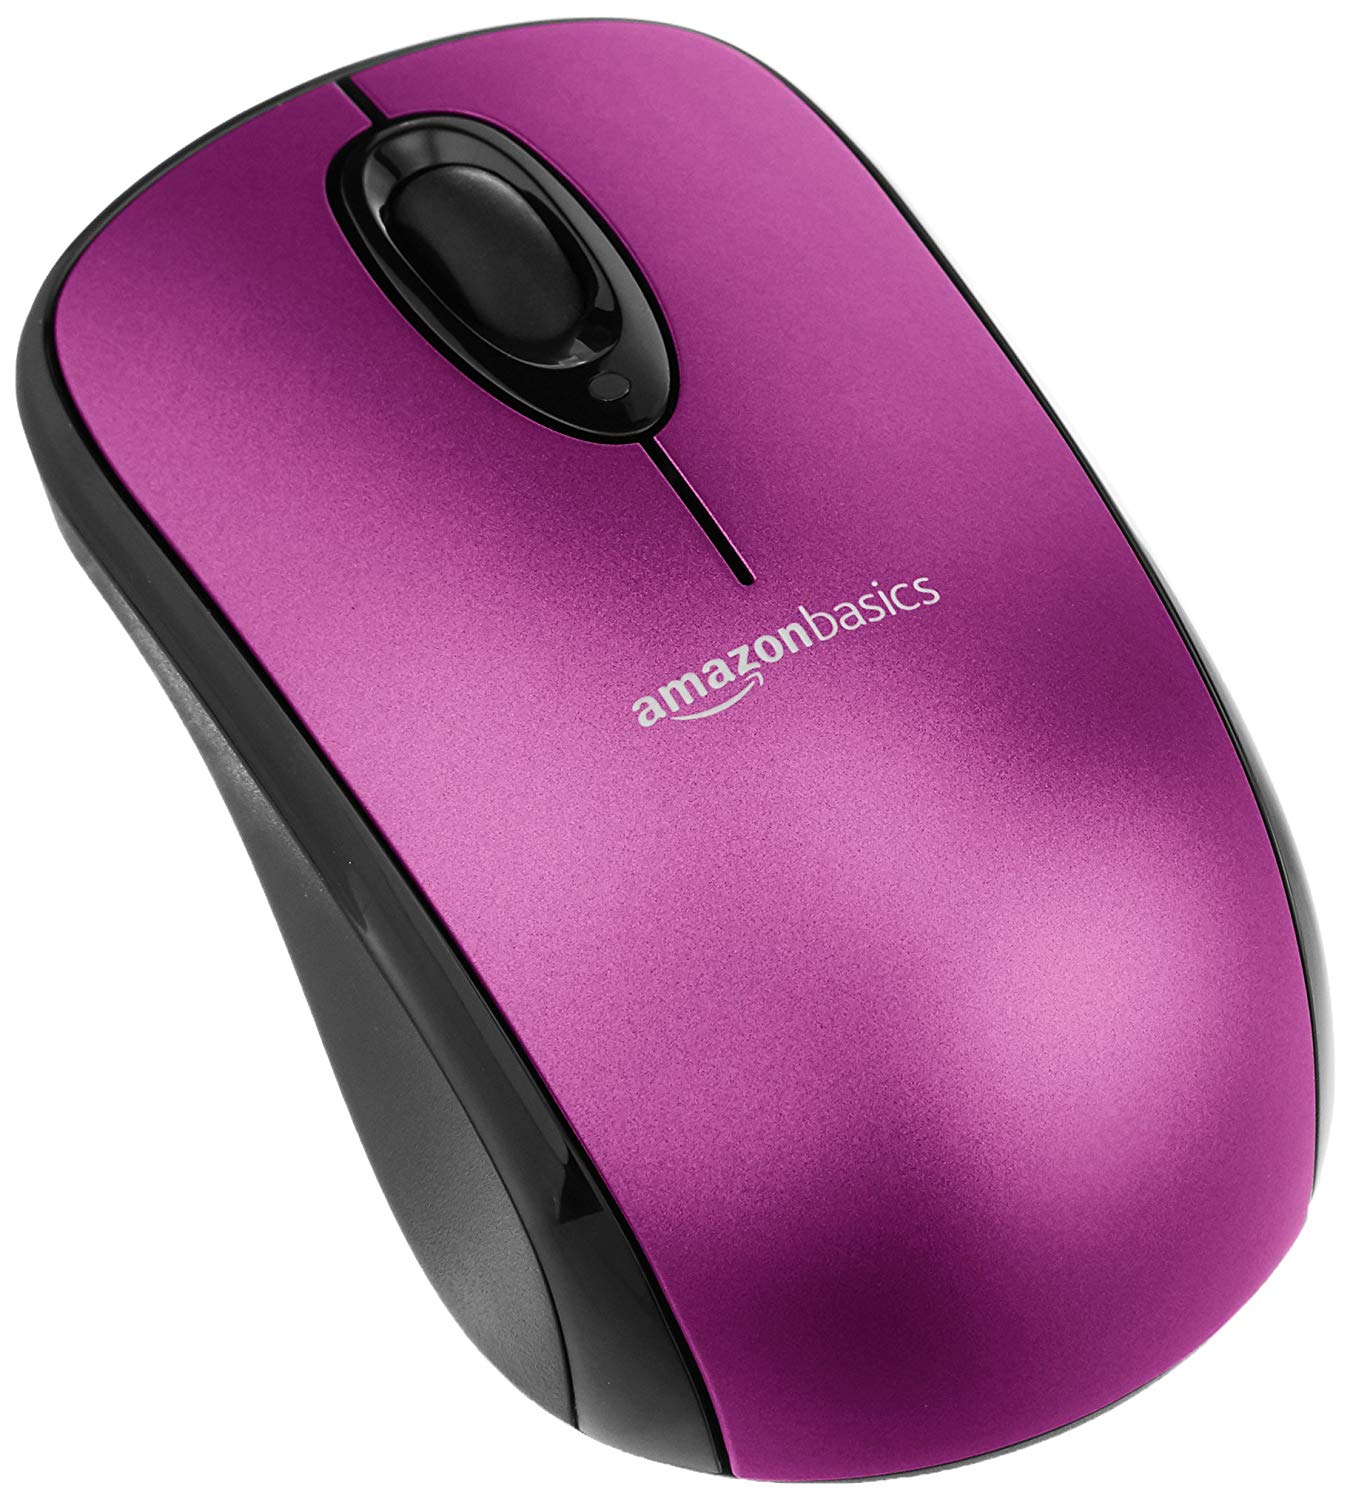 remote mouse download